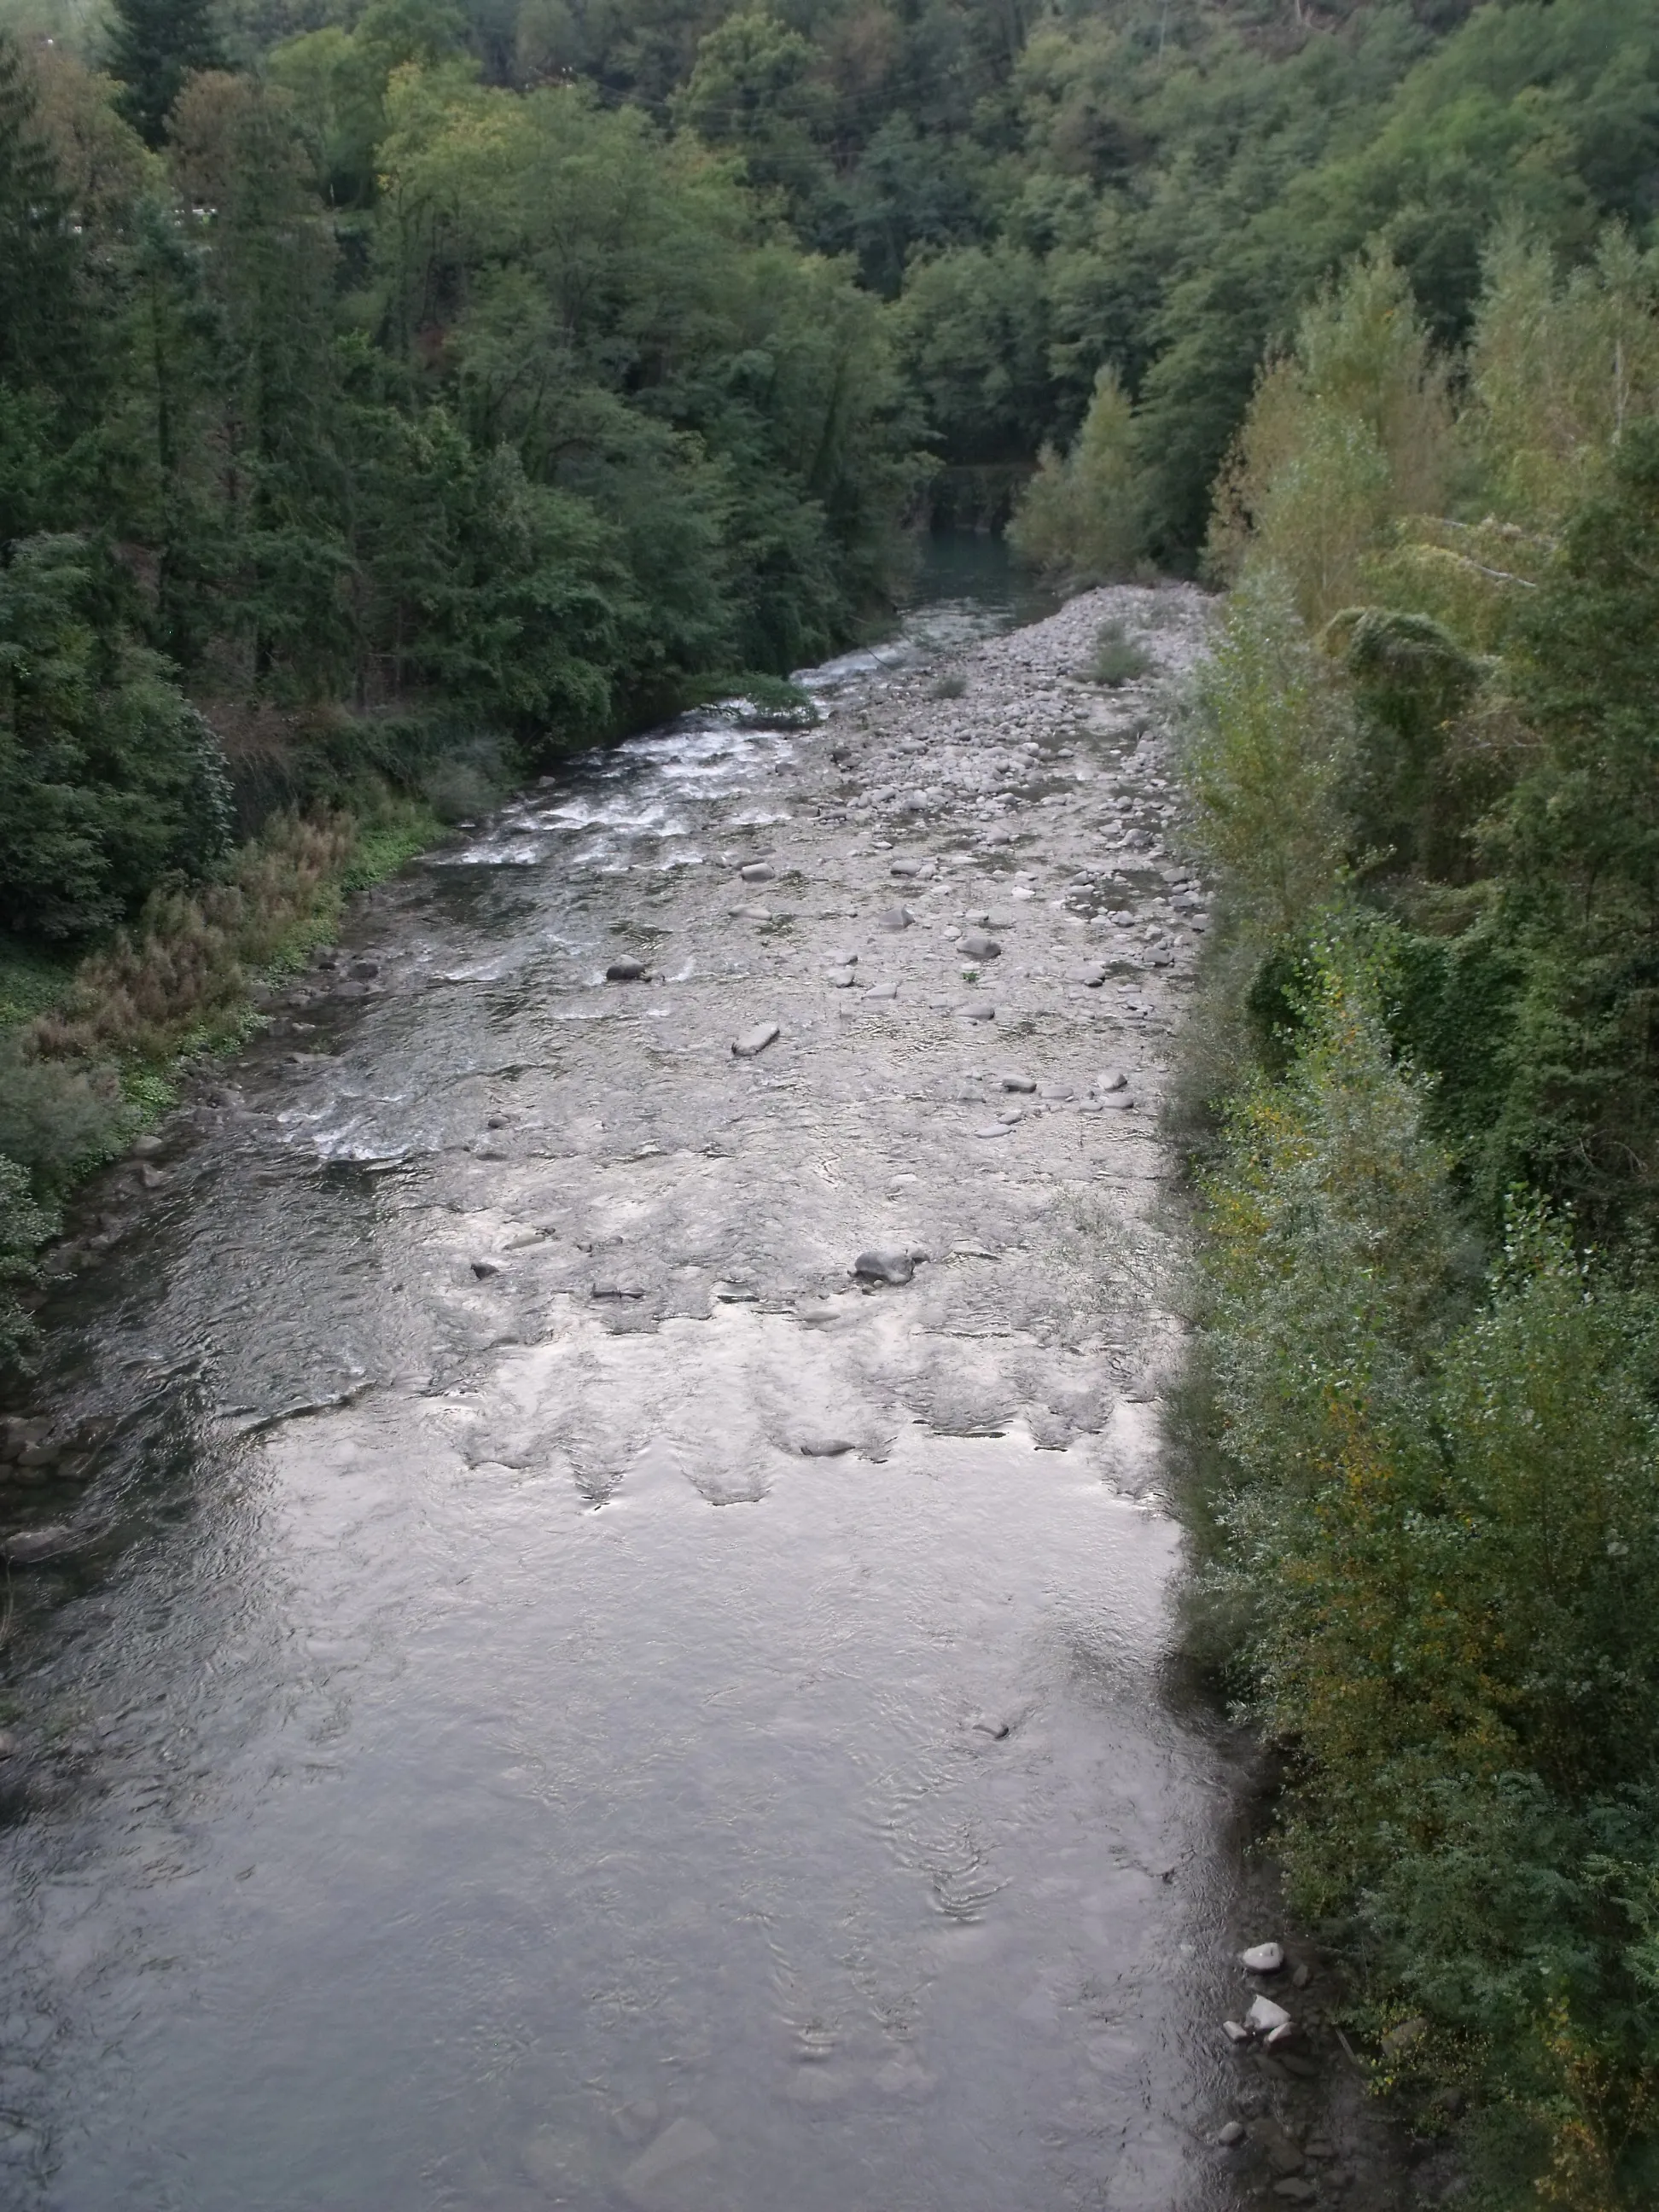 Photo showing: The Lima River in La Lima (hamlet of Piteglio), Province of Pistoia, Tuscany, Italy